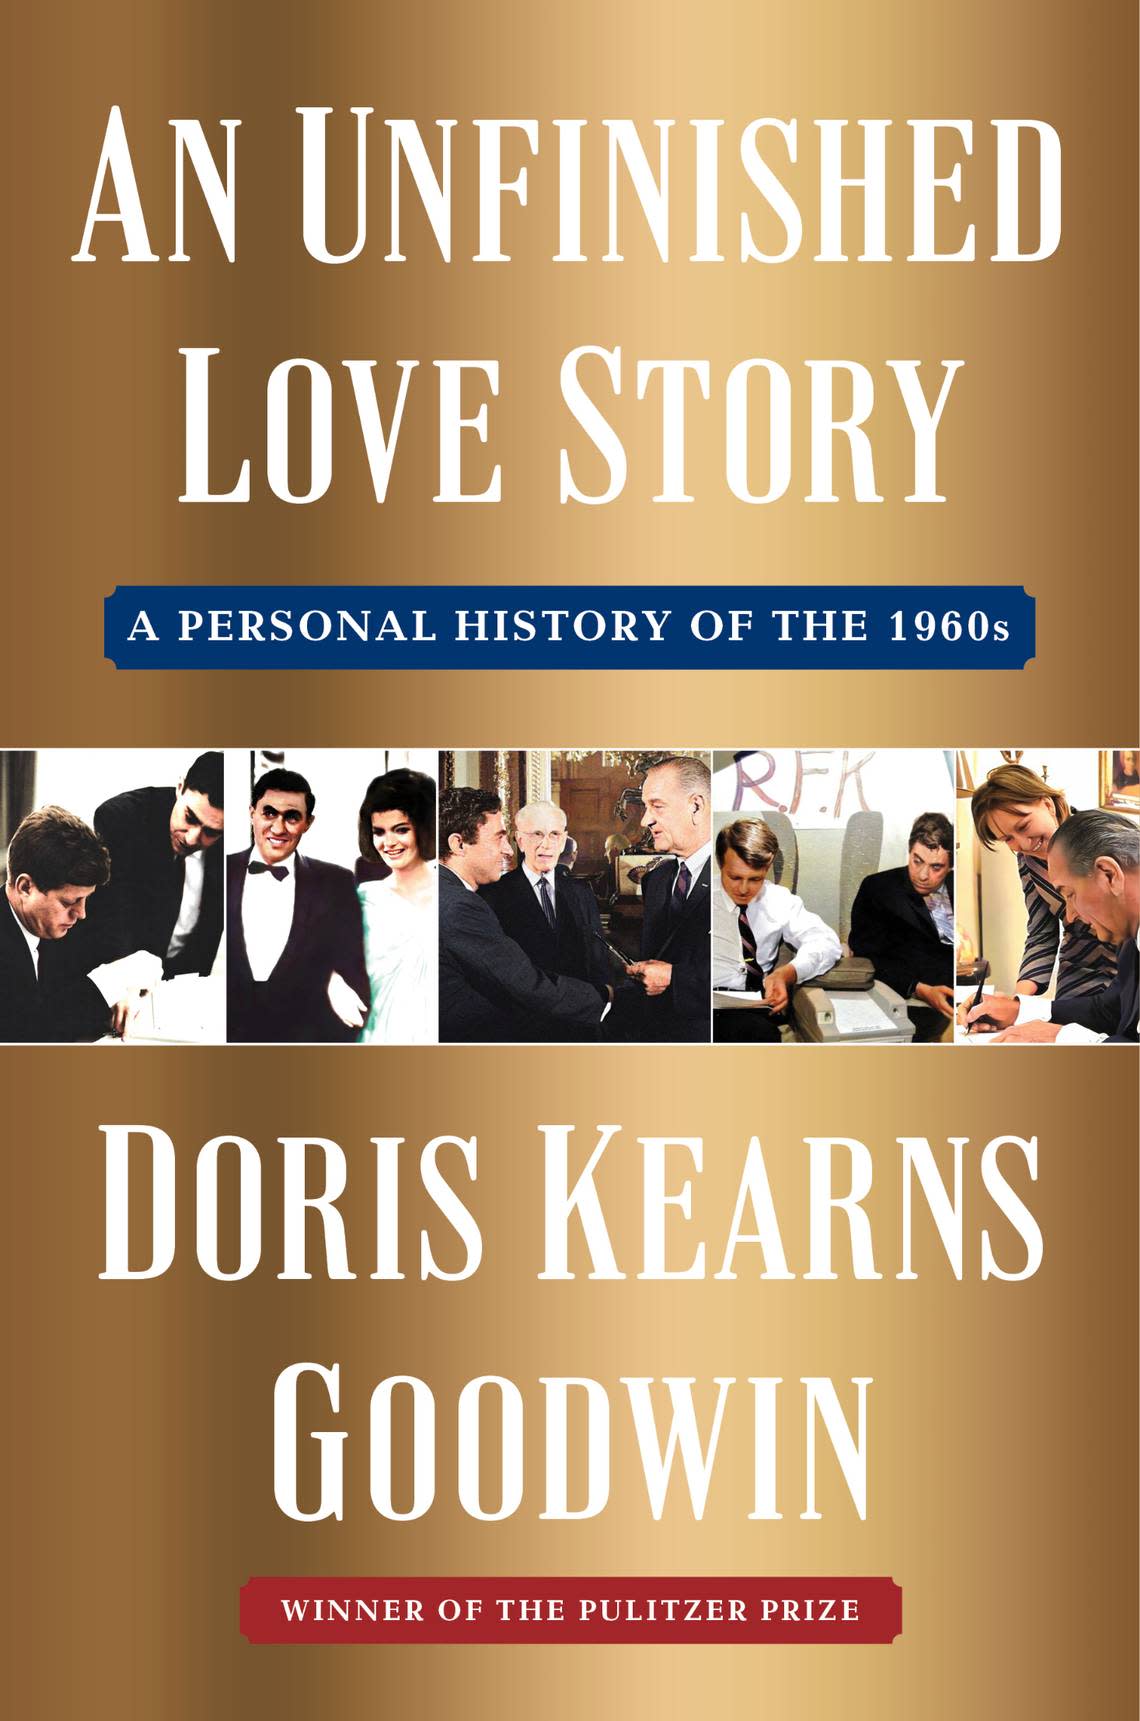 “An Unfinished Love Story: A Personal History of the 1960s,” which is Doris Kearns Goodwin’s eighth book, focuses on her late husband, Richard Goodwin.